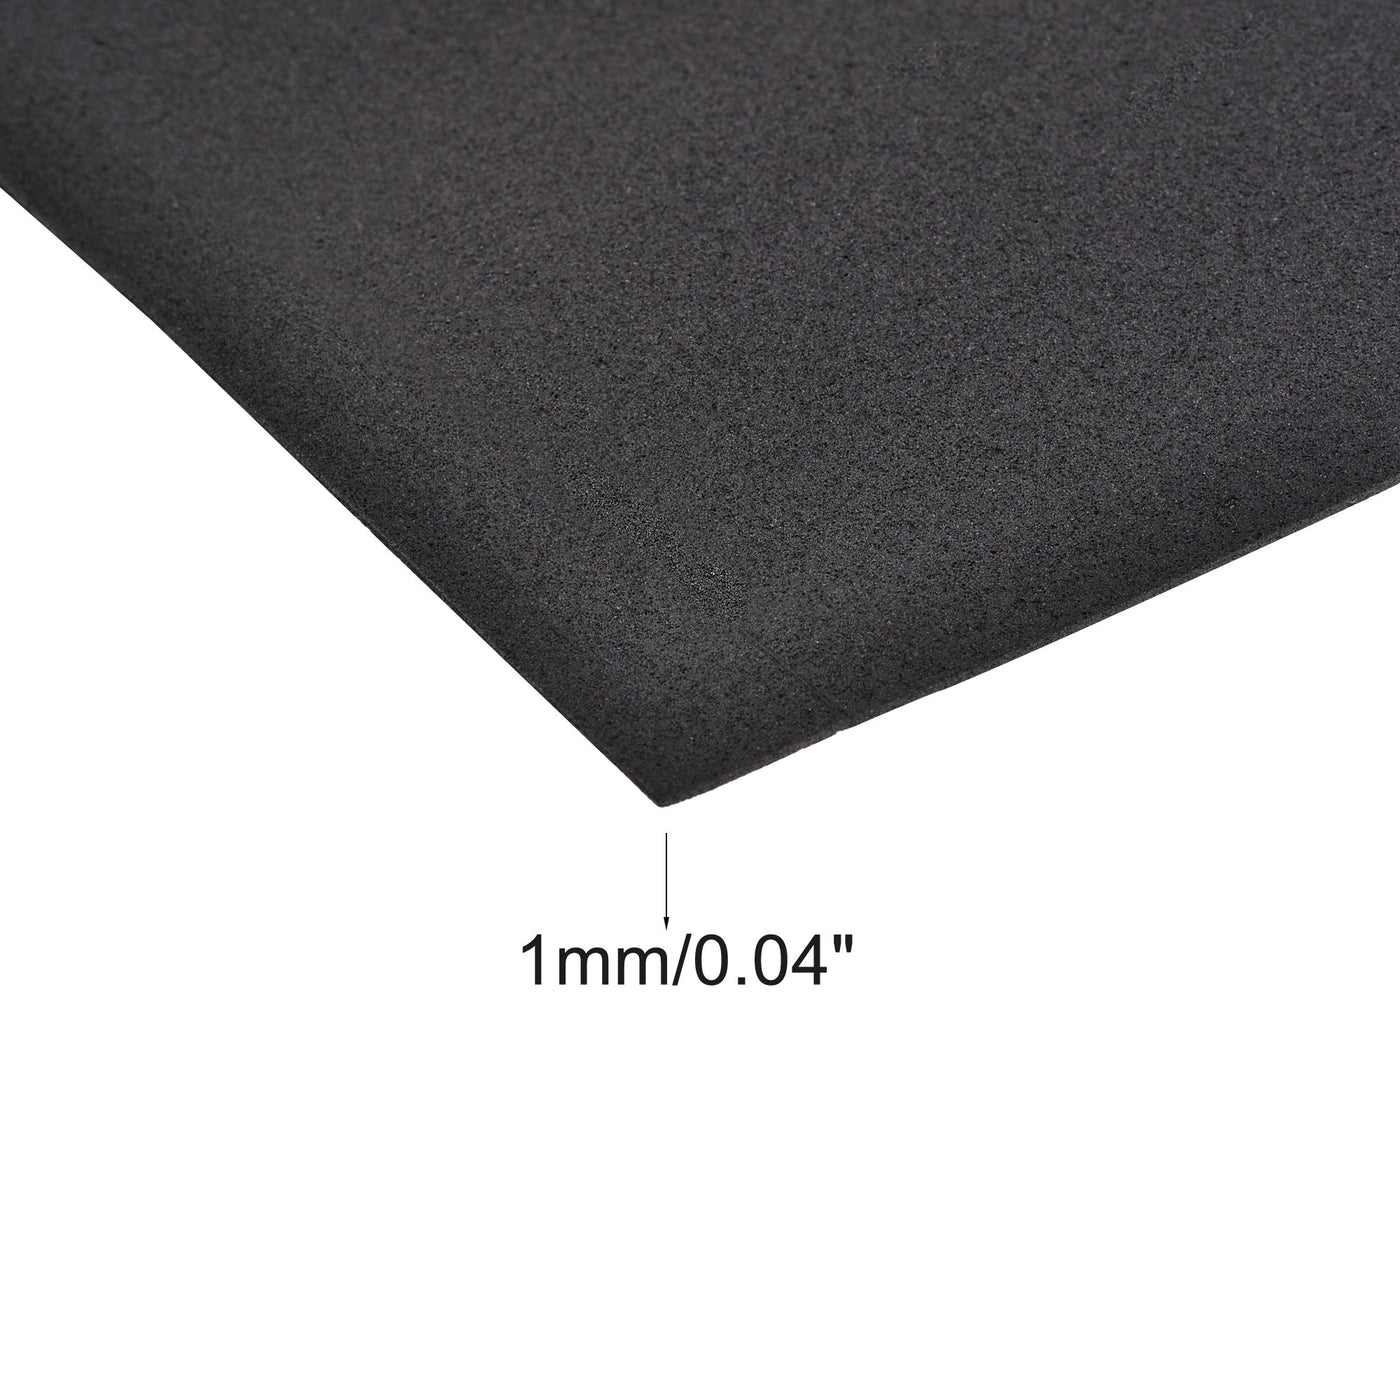 Uxcell Uxcell Black EVA Foam Sheets Roll 13 x 39 Inch 10mm Thick for Crafts DIY Projects, 2Pcs